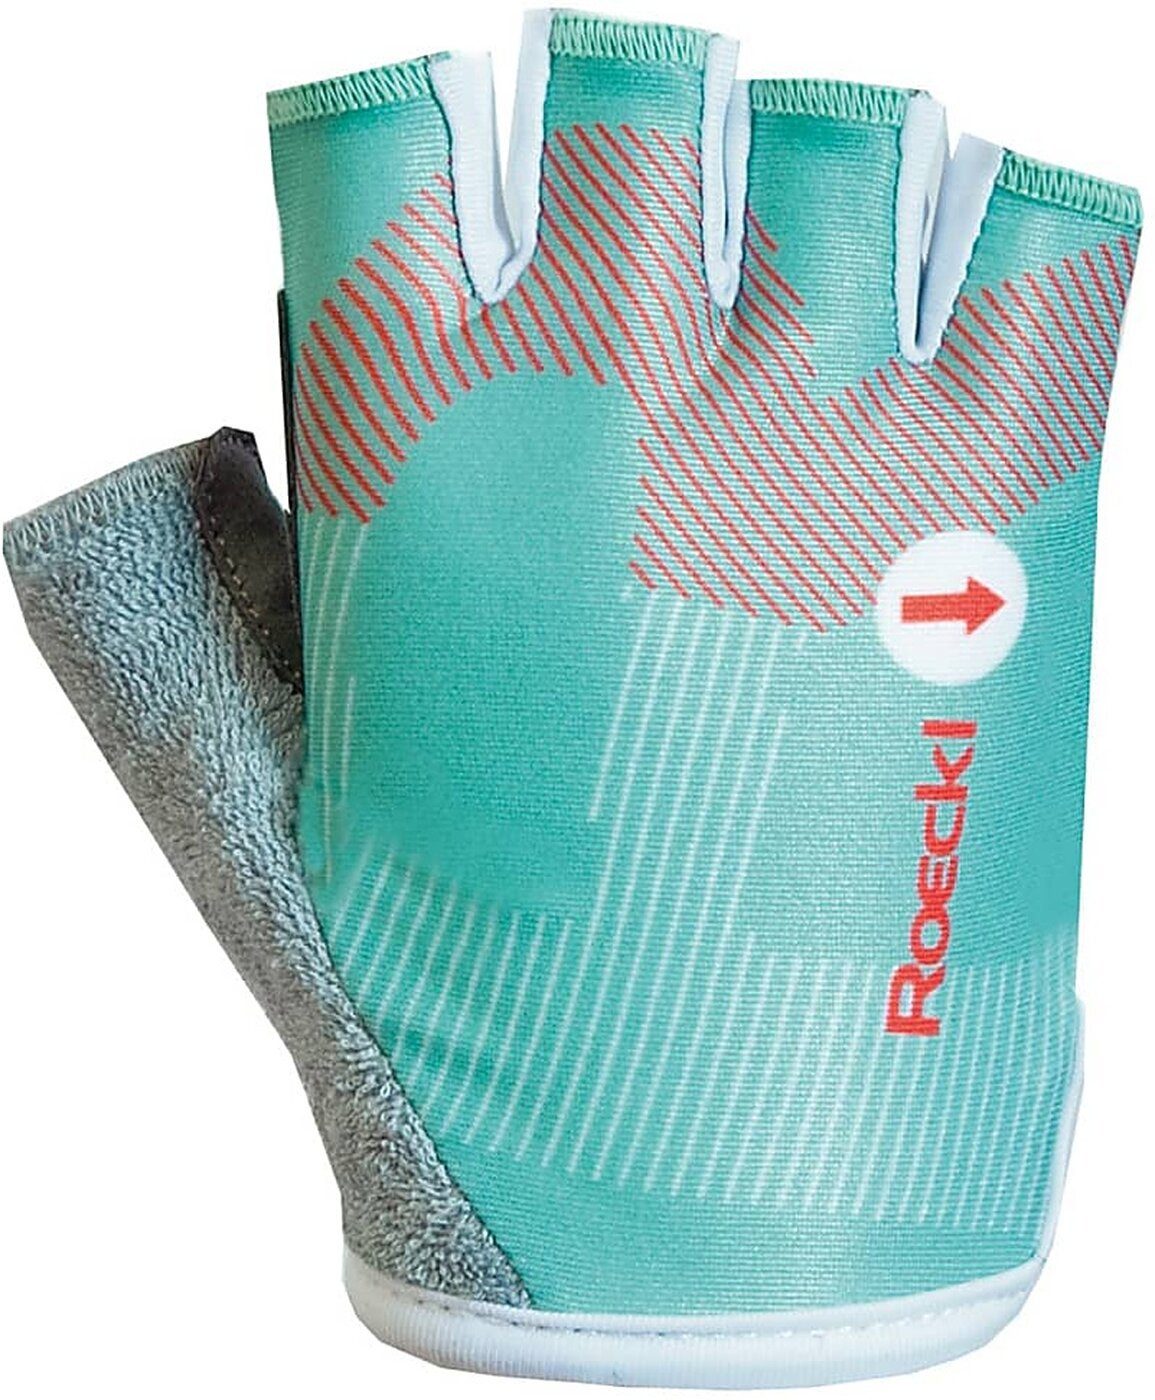 Roeckl Fahrradhandschuhe Teo 0530 turquoise